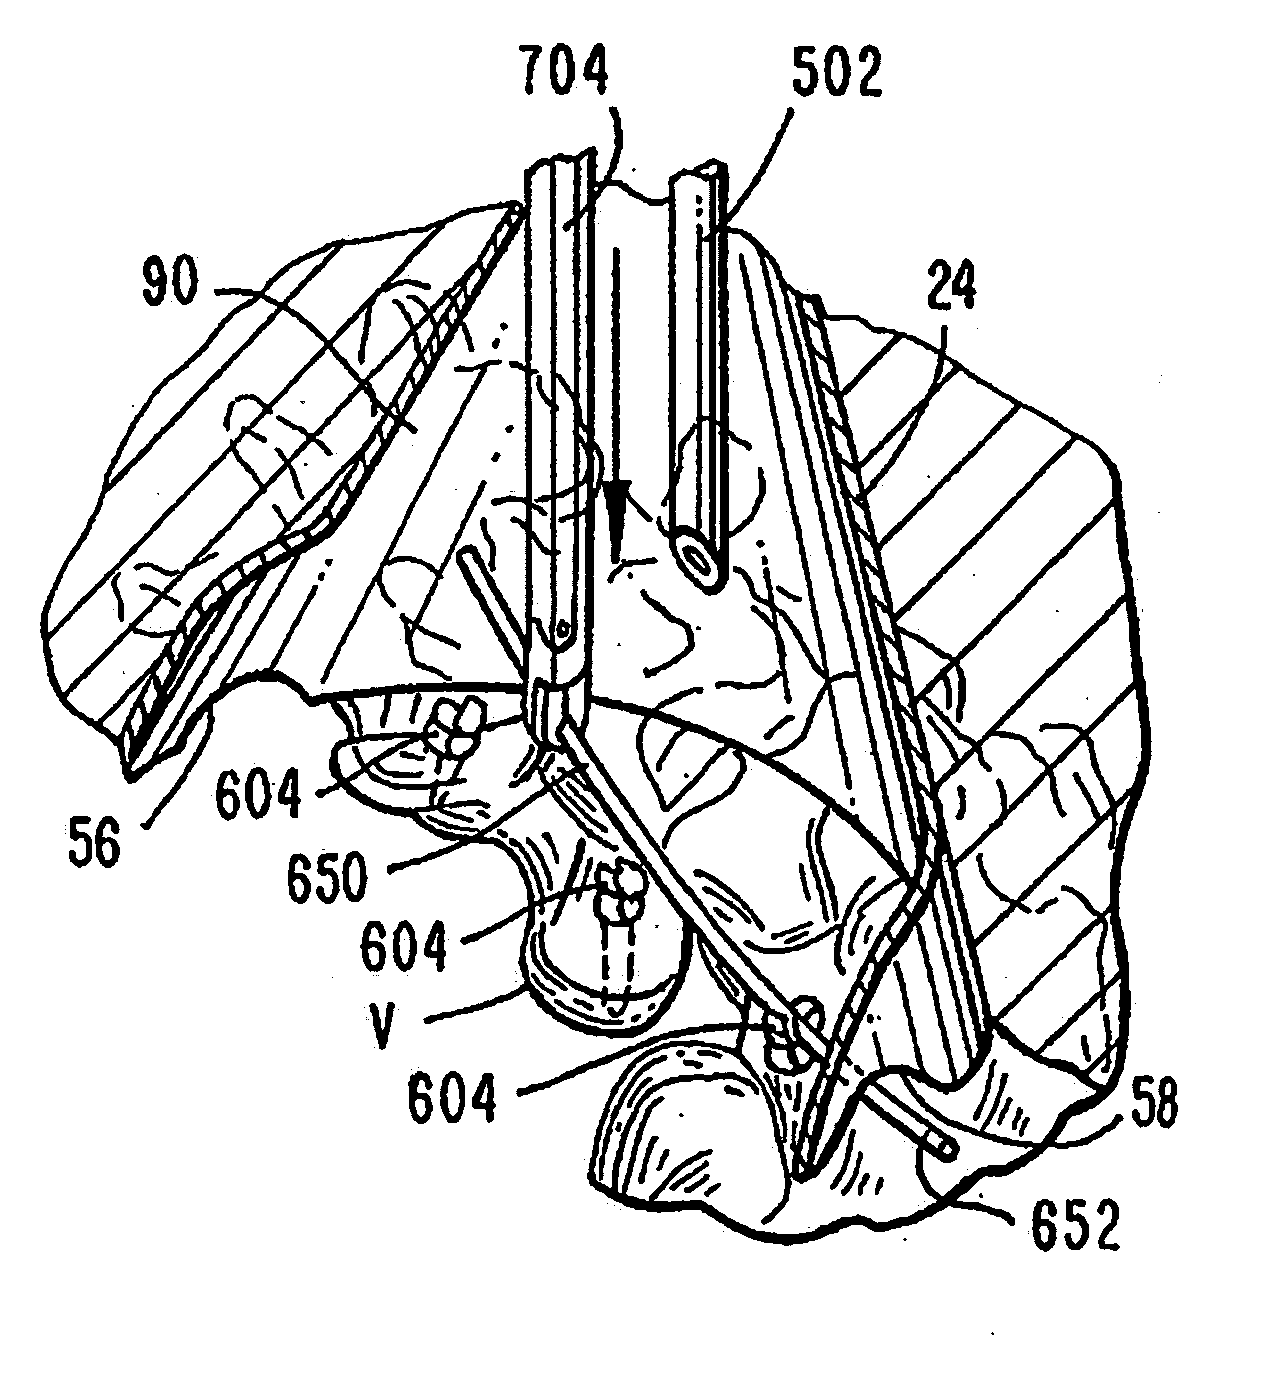 Methods and apparatuses for treating the spine through an access device